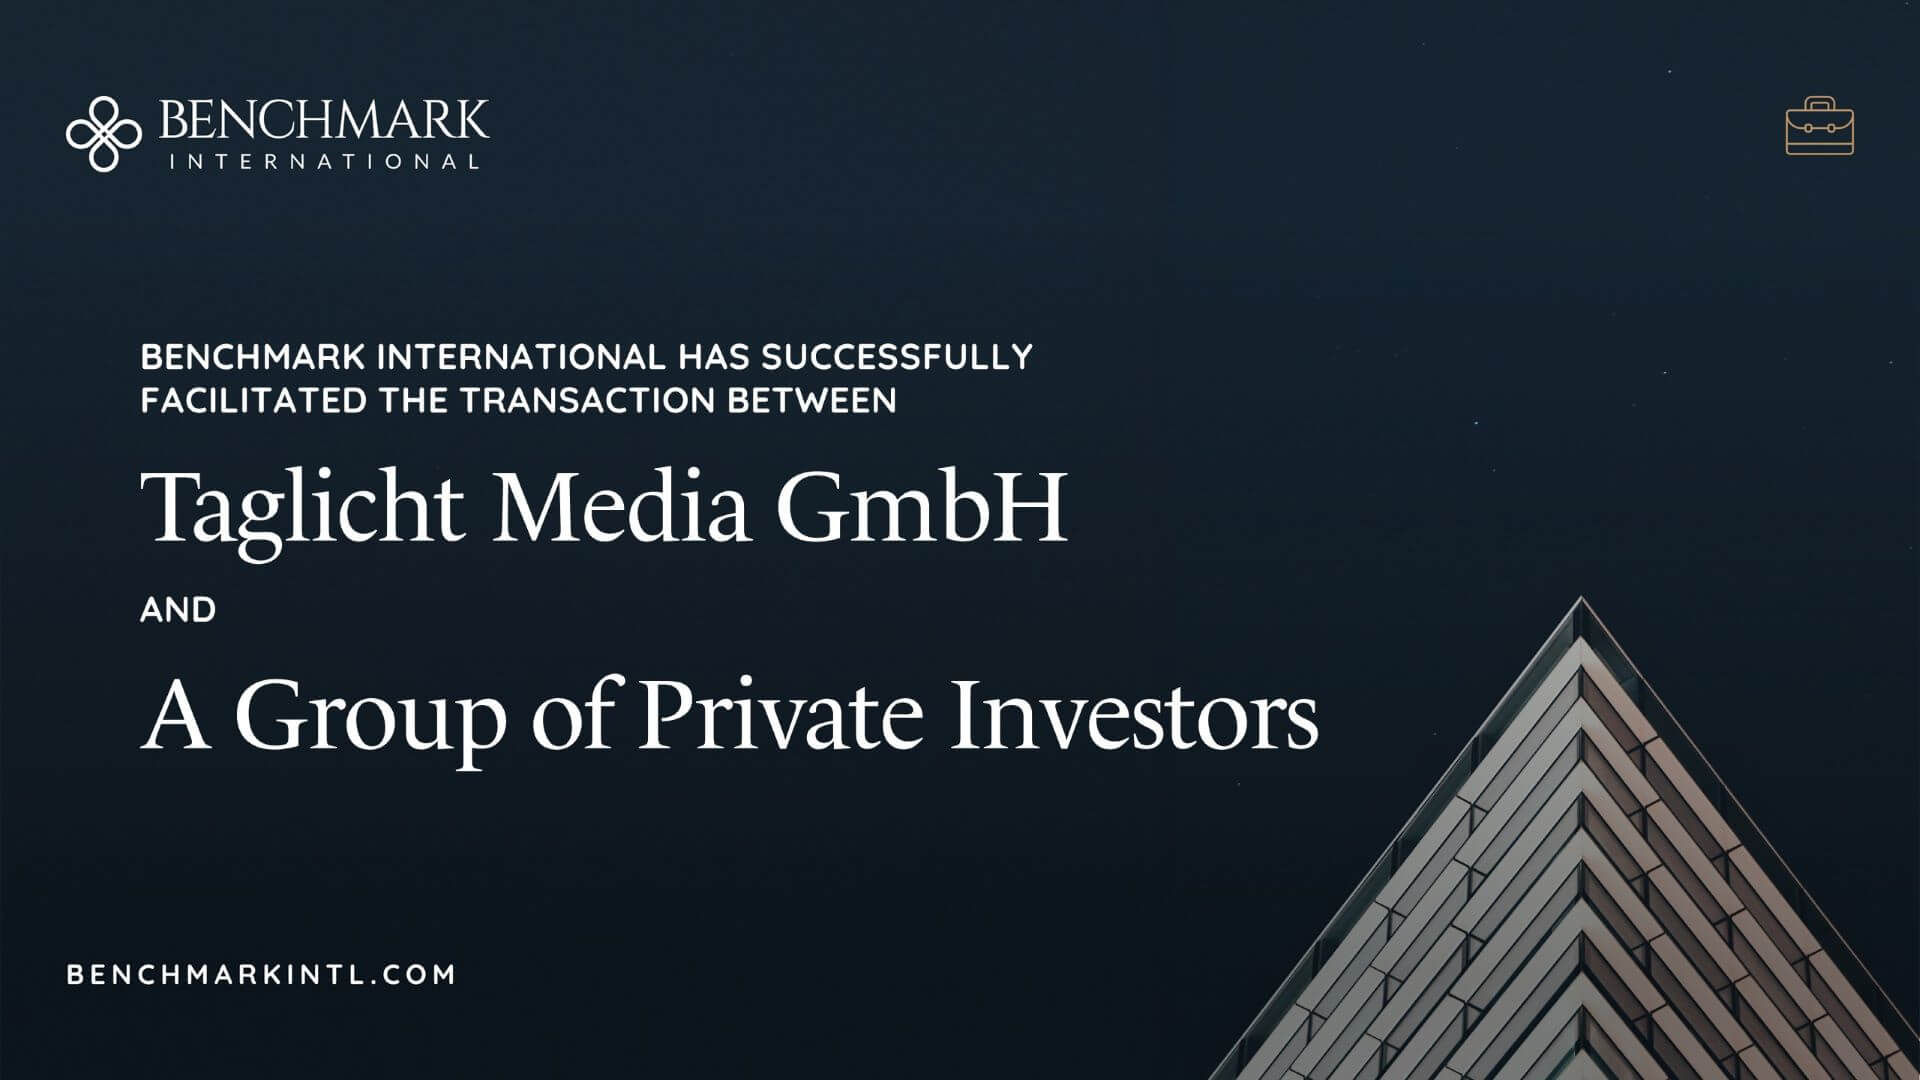 Benchmark International Successfully Facilitated the Transaction Between Taglicht Media GmbH and a Group of Private Investors